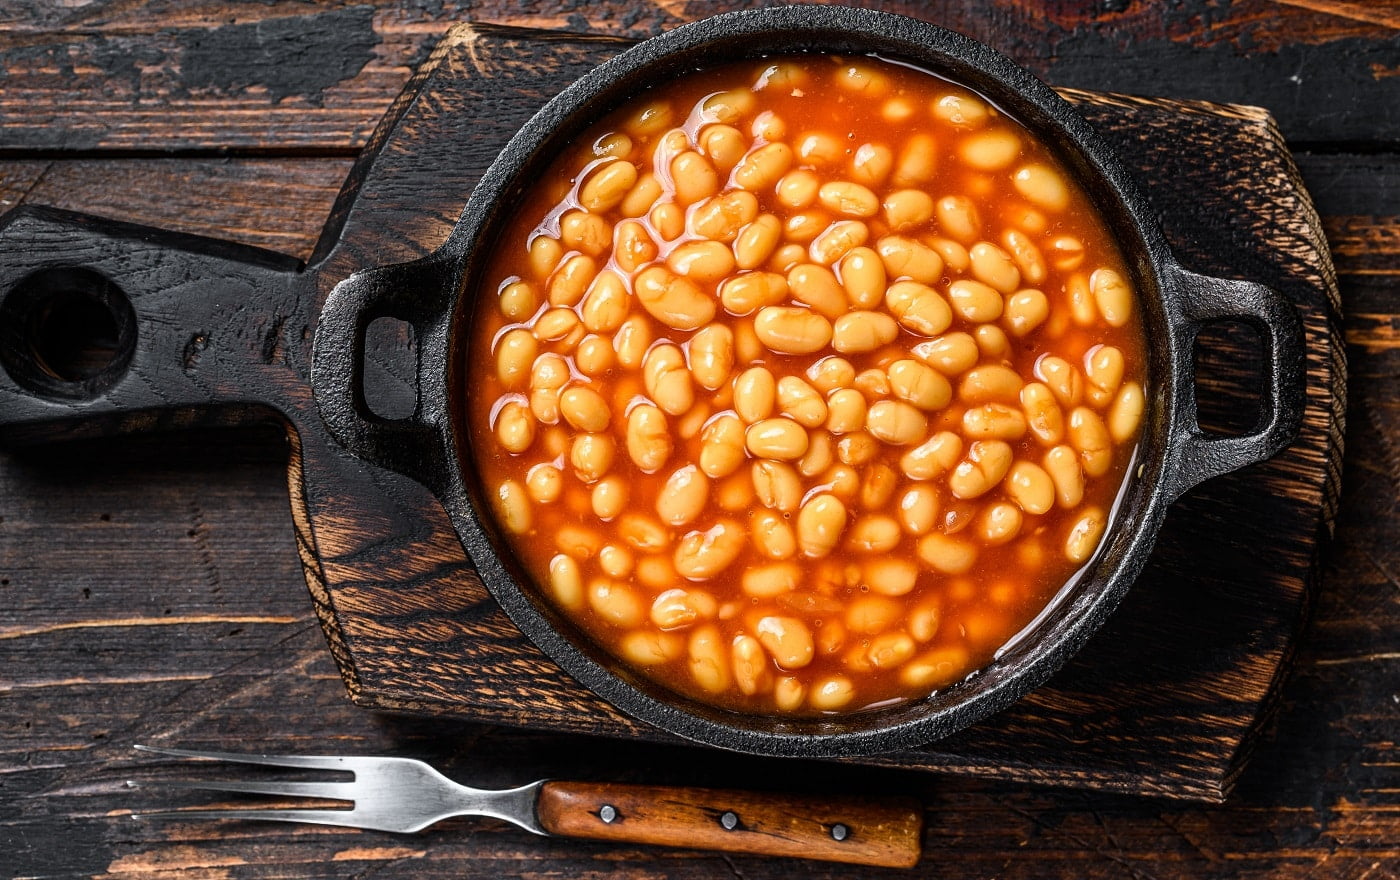 Beans in tomato sauce in a pan. Dark wooden background. top view.